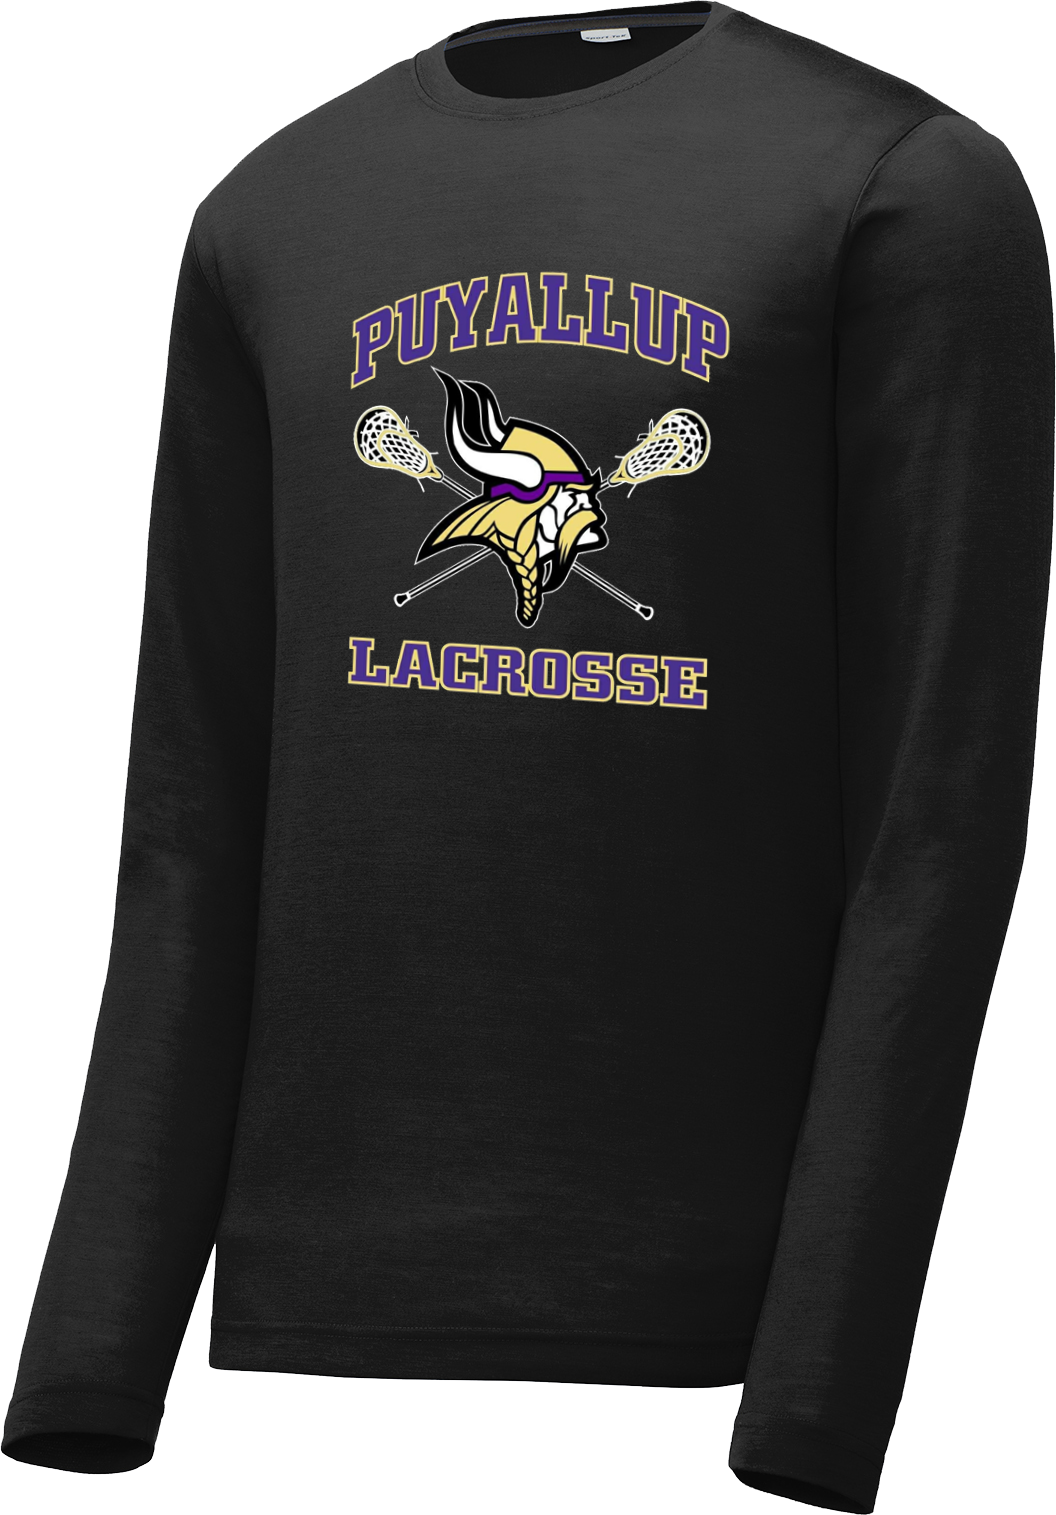 Puyallup Lacrosse Black Long Sleeve CottonTouch Performance Shirt